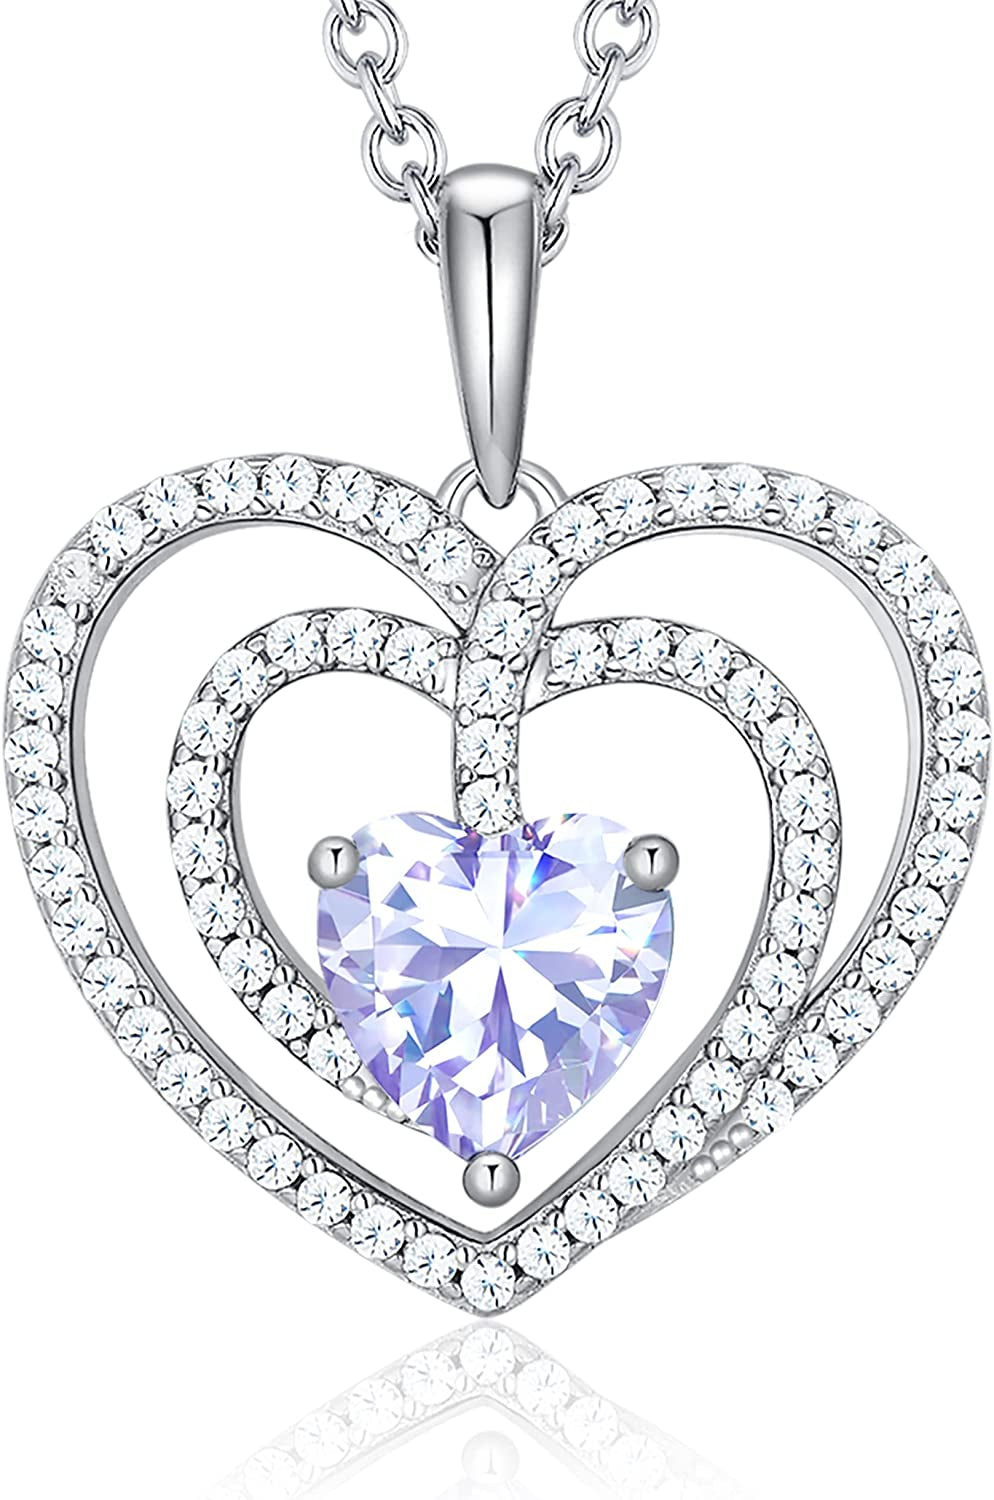 Buy Sterling Silver Birthstone Necklace - Heart Pendant Jewelry